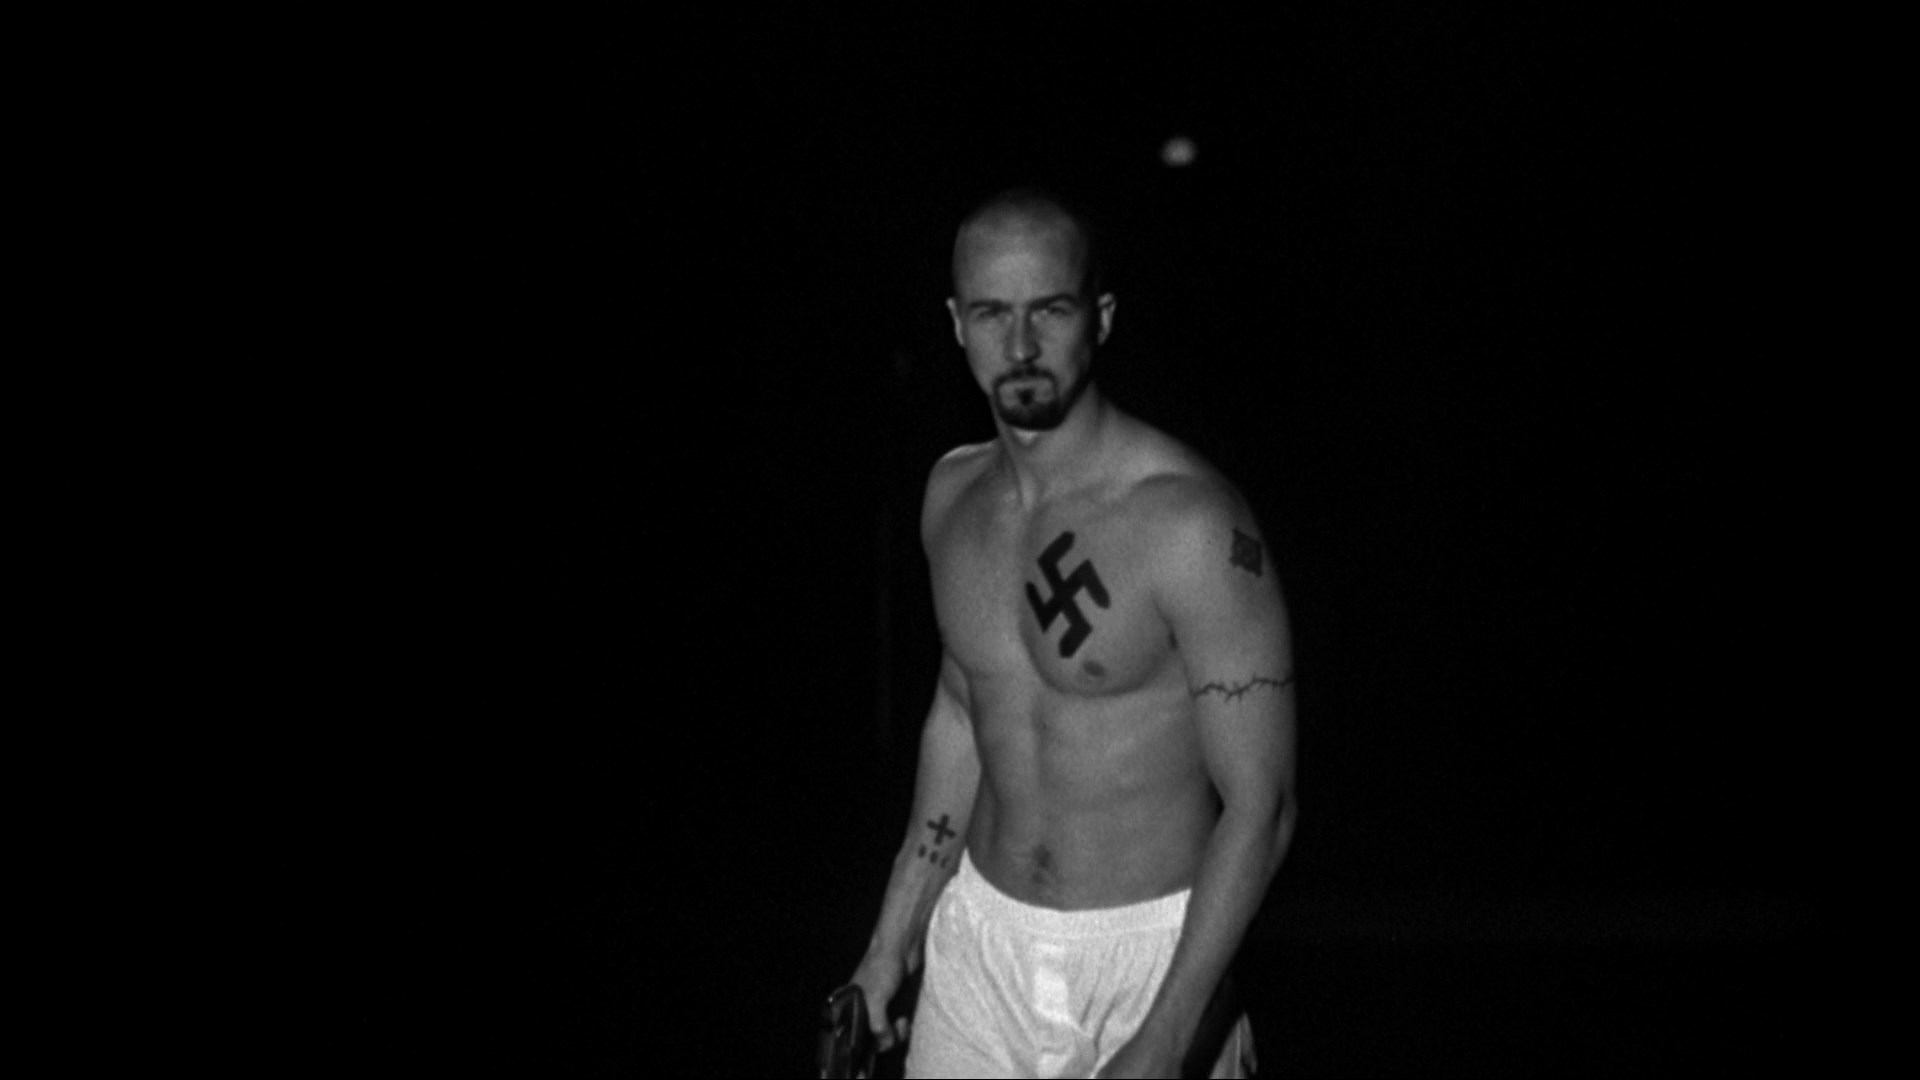 Free Download American History X Wallpaper on our website with great care. 